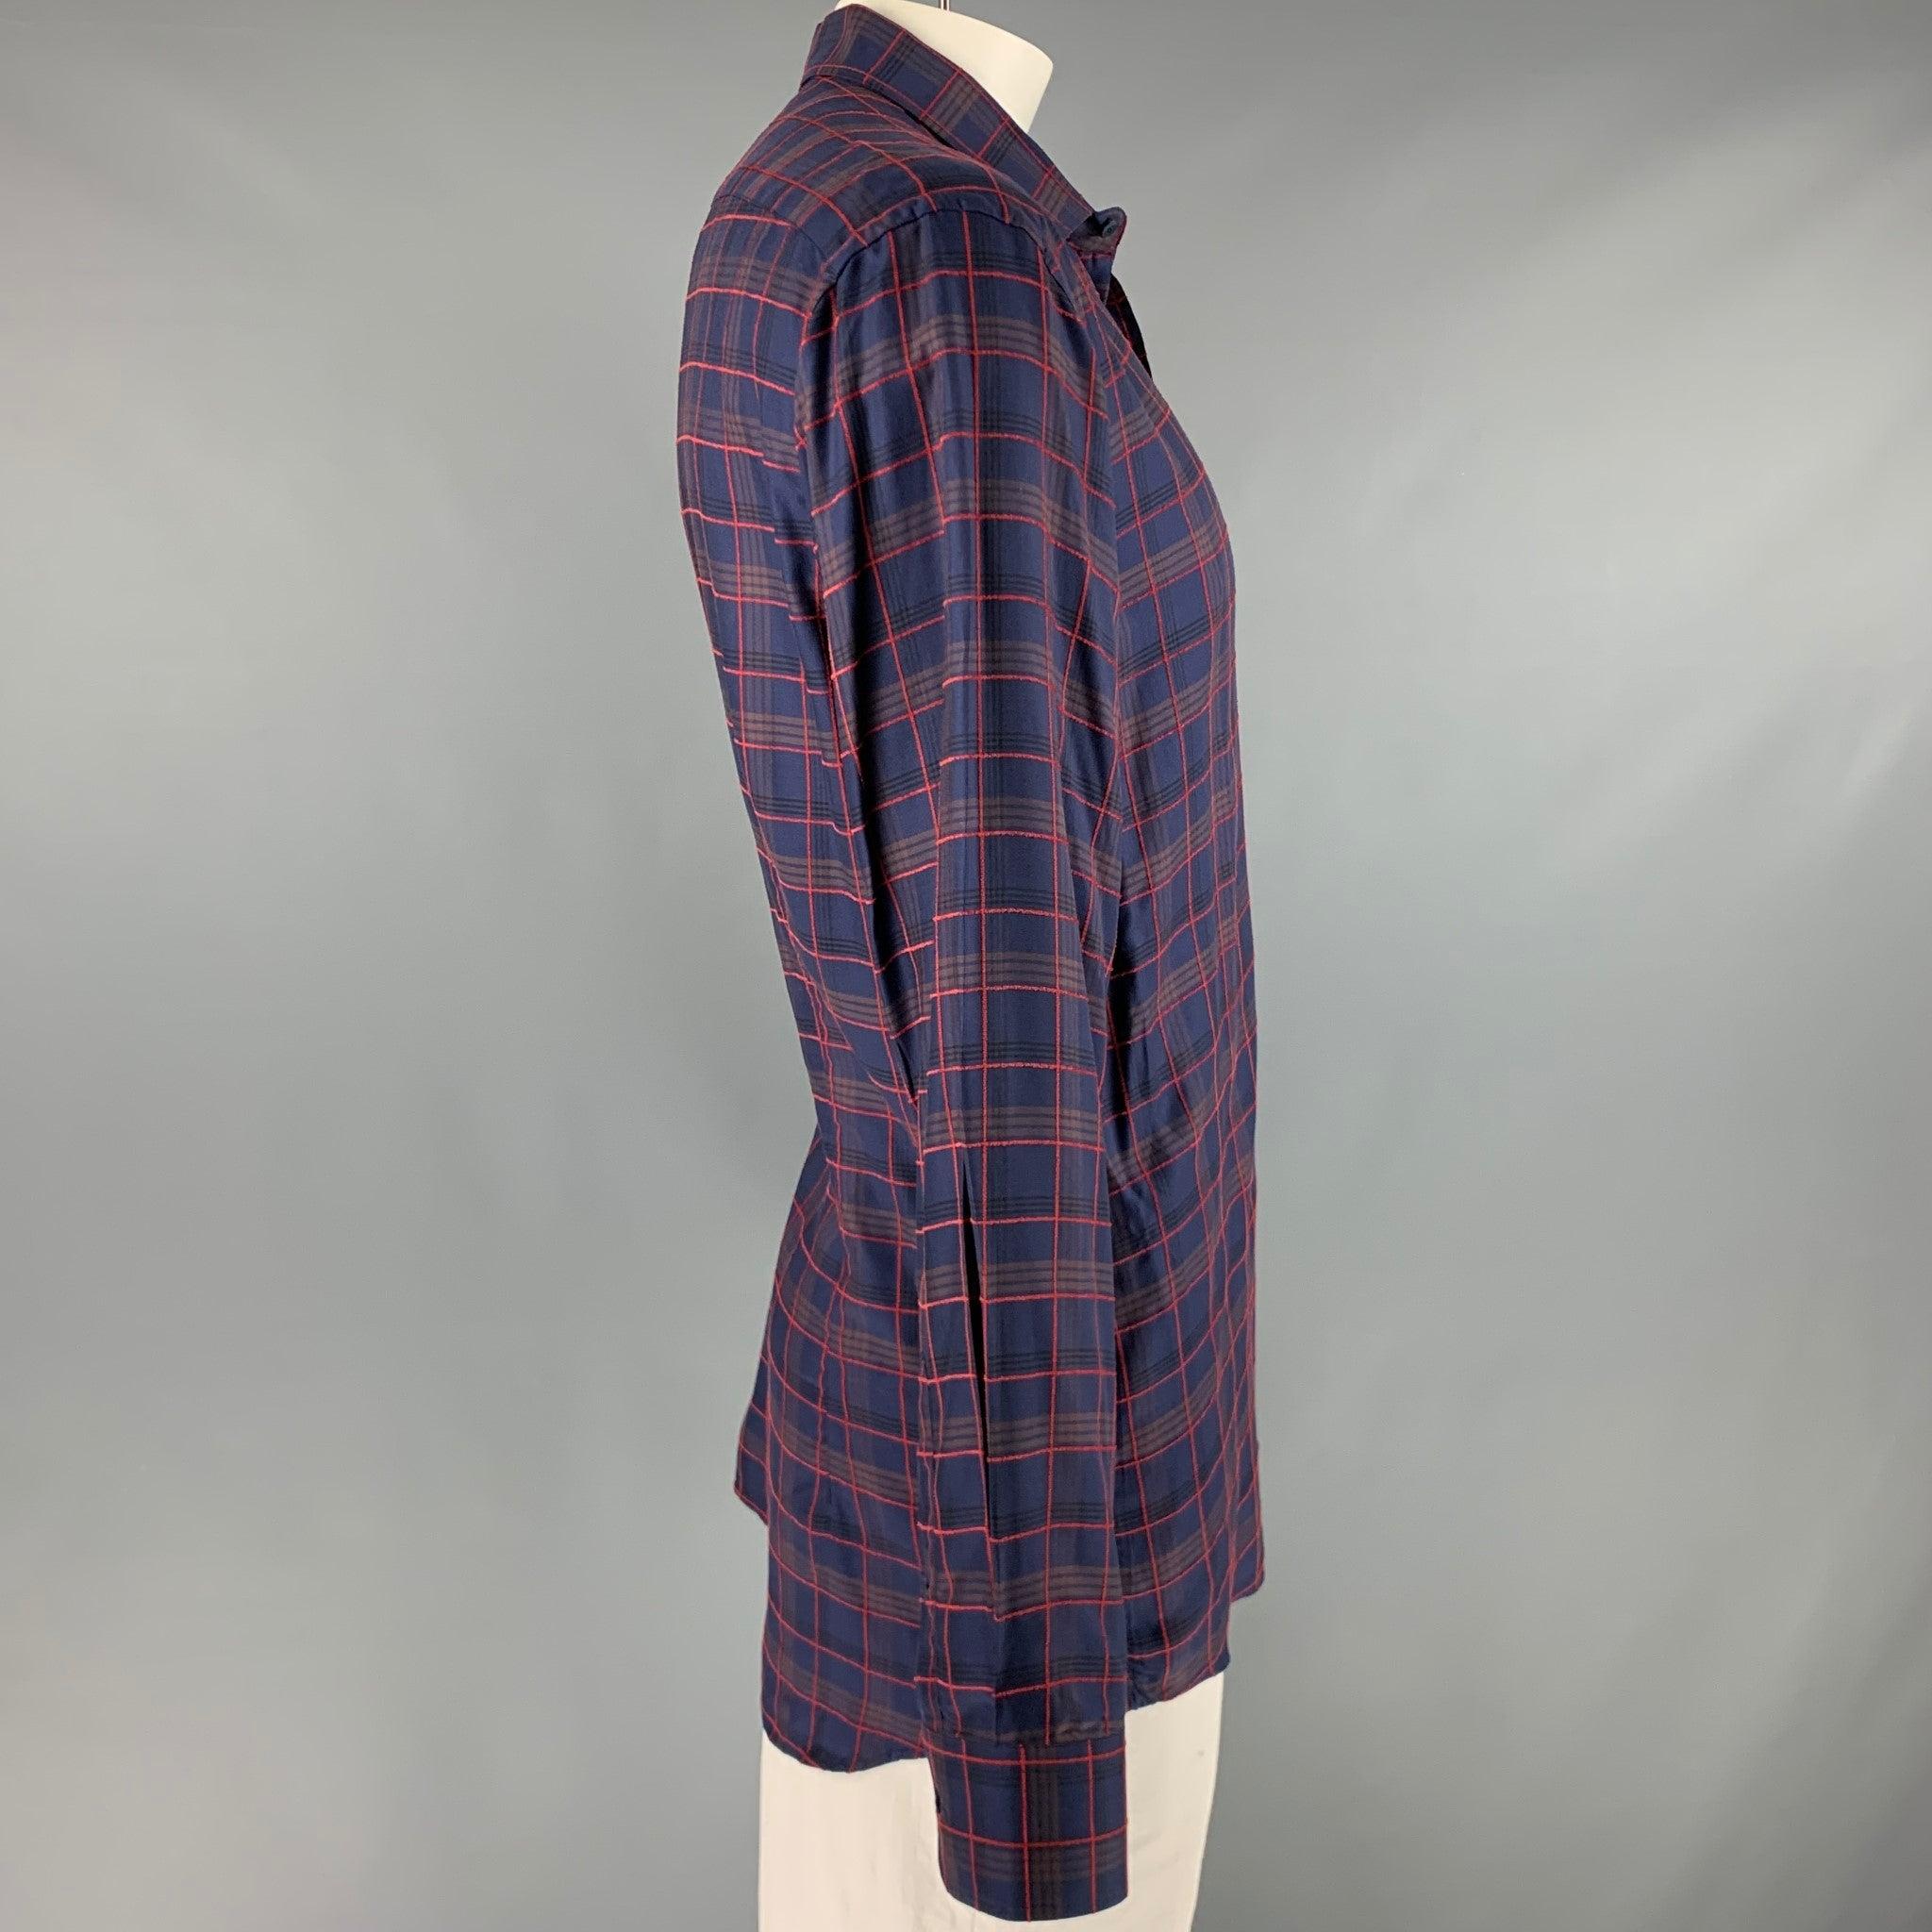 ETRO BEN ETRO ESSERE long sleeve shirt in a navy and red lyocel cotton blend fabric featuring a plaid pattern, spread collar, and button closure. Made in Italy.Excellent Pre-Owned Condition. 

Marked:   44 

Measurements: 
 
Shoulder: 18.5 inches